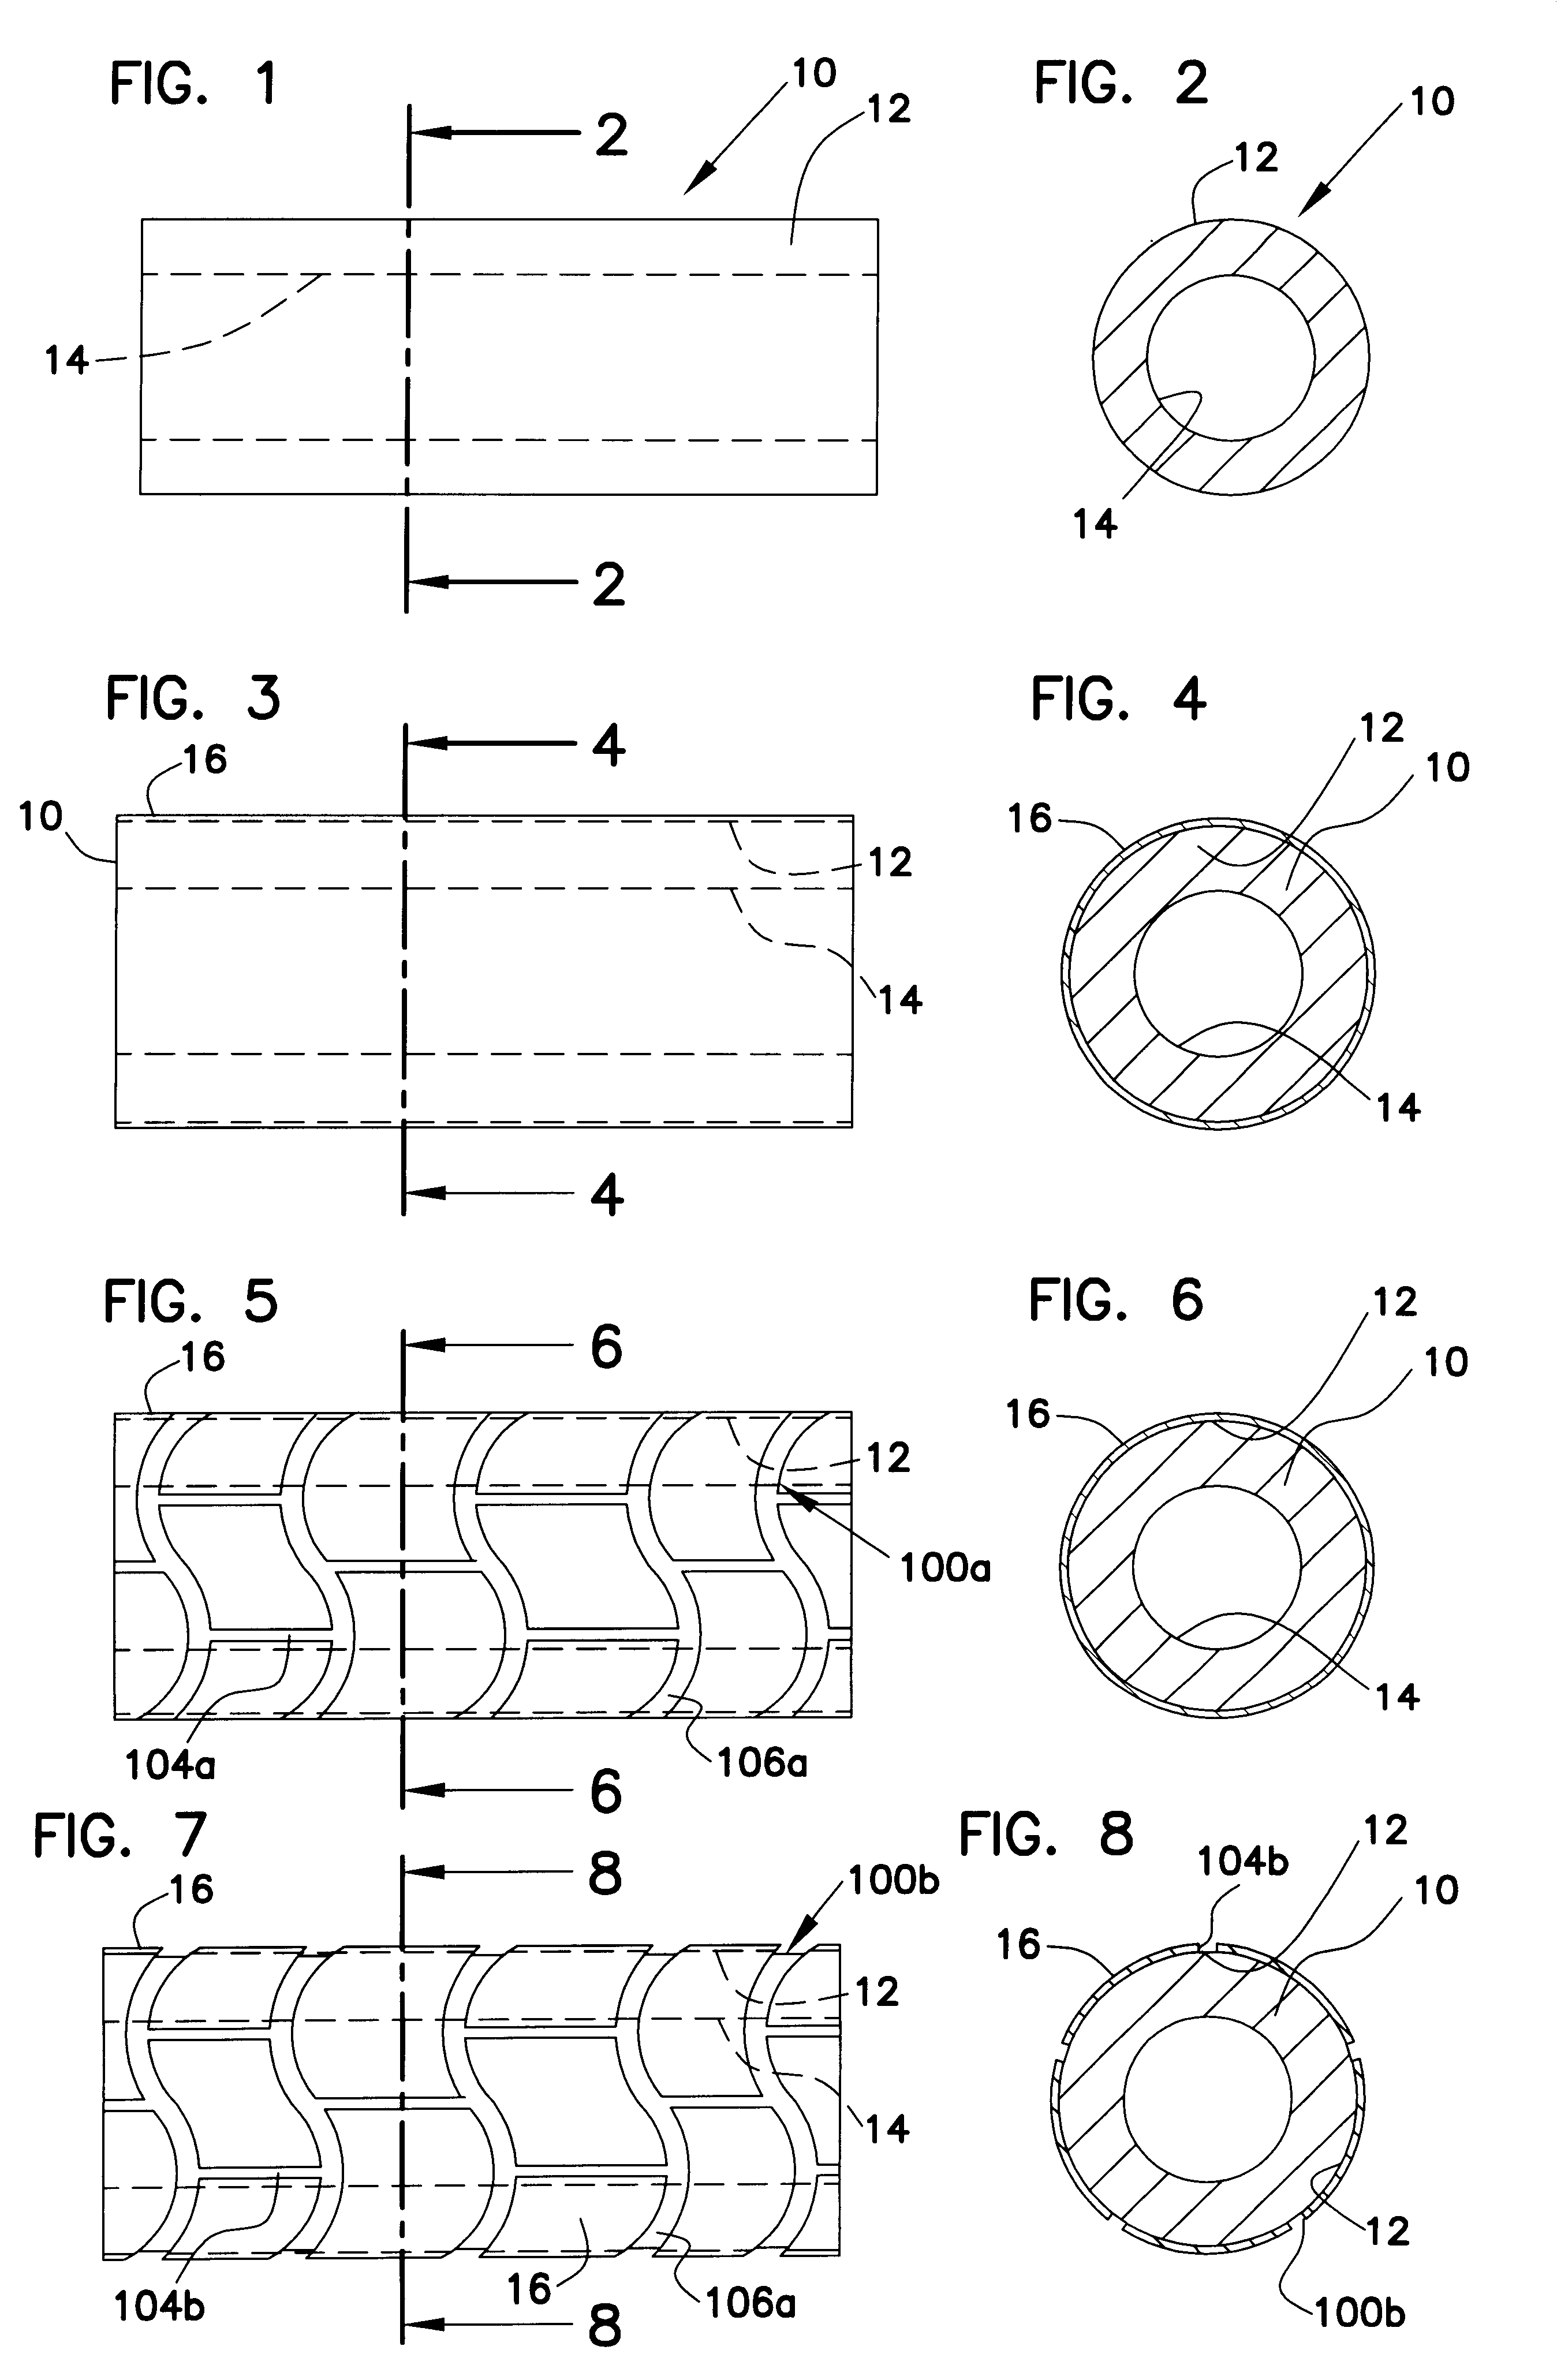 Method for manufacturing intraluminal device